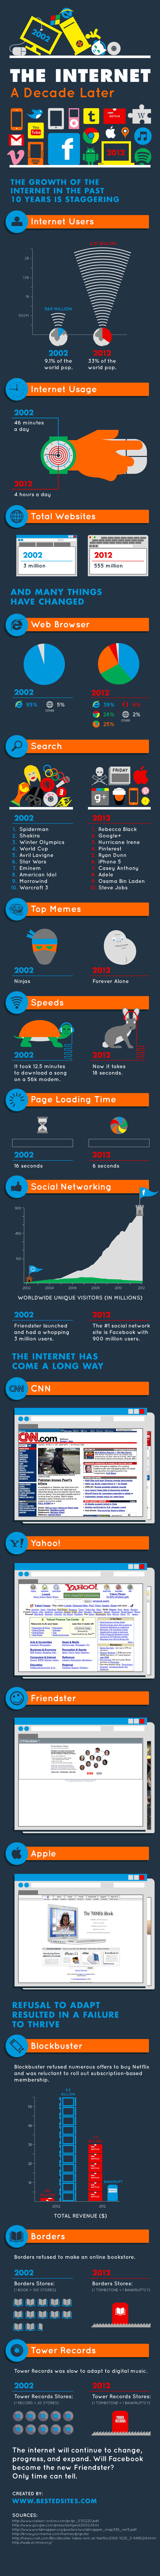 The Internet: A Decade Later